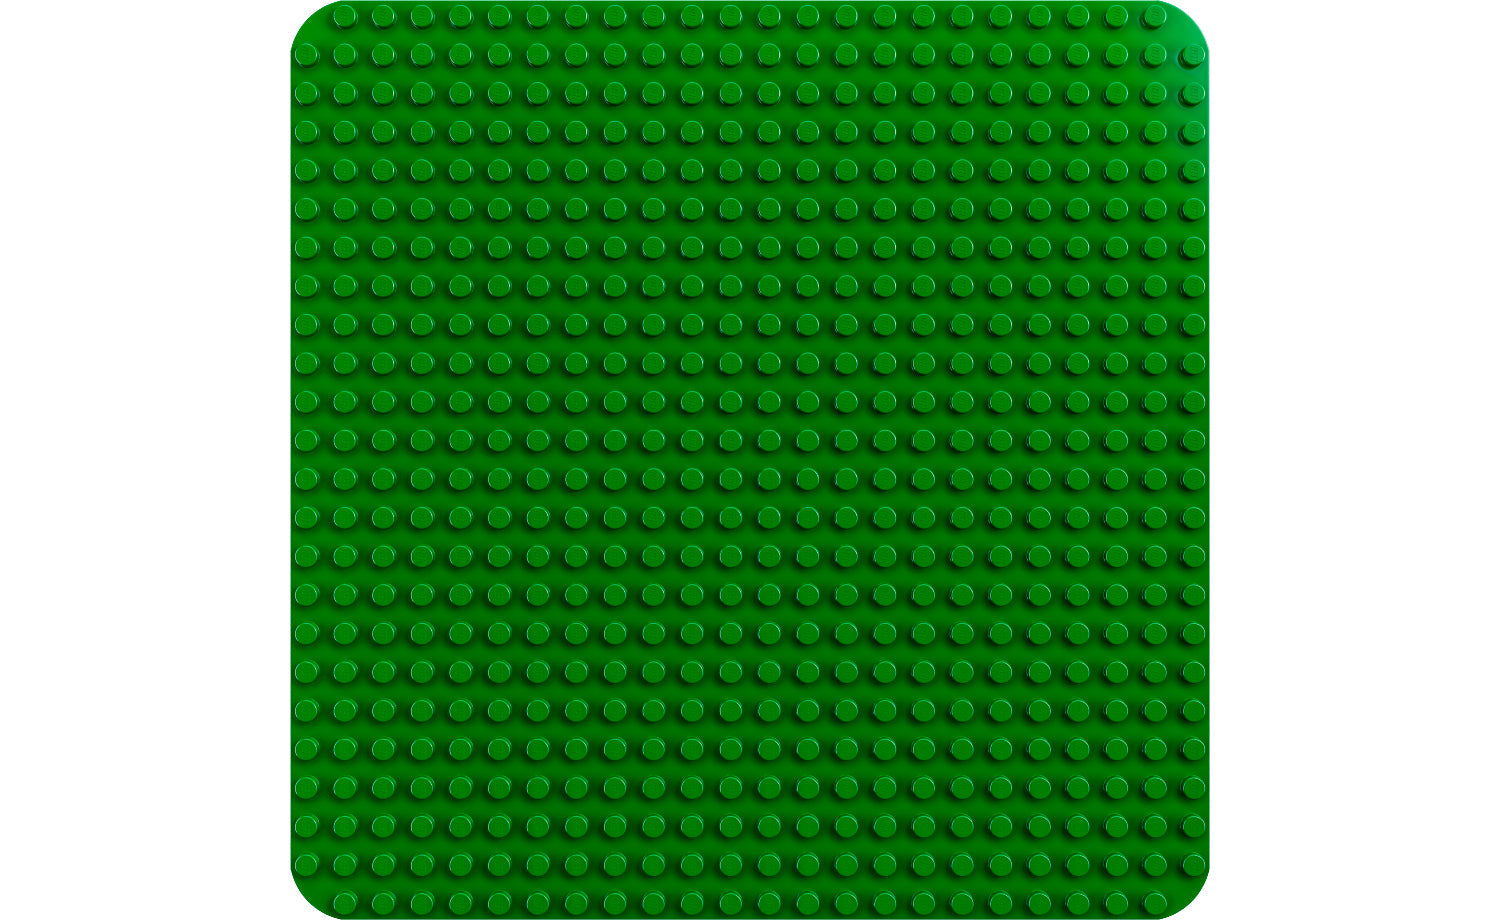 Lego DUPLO Green Building Plate